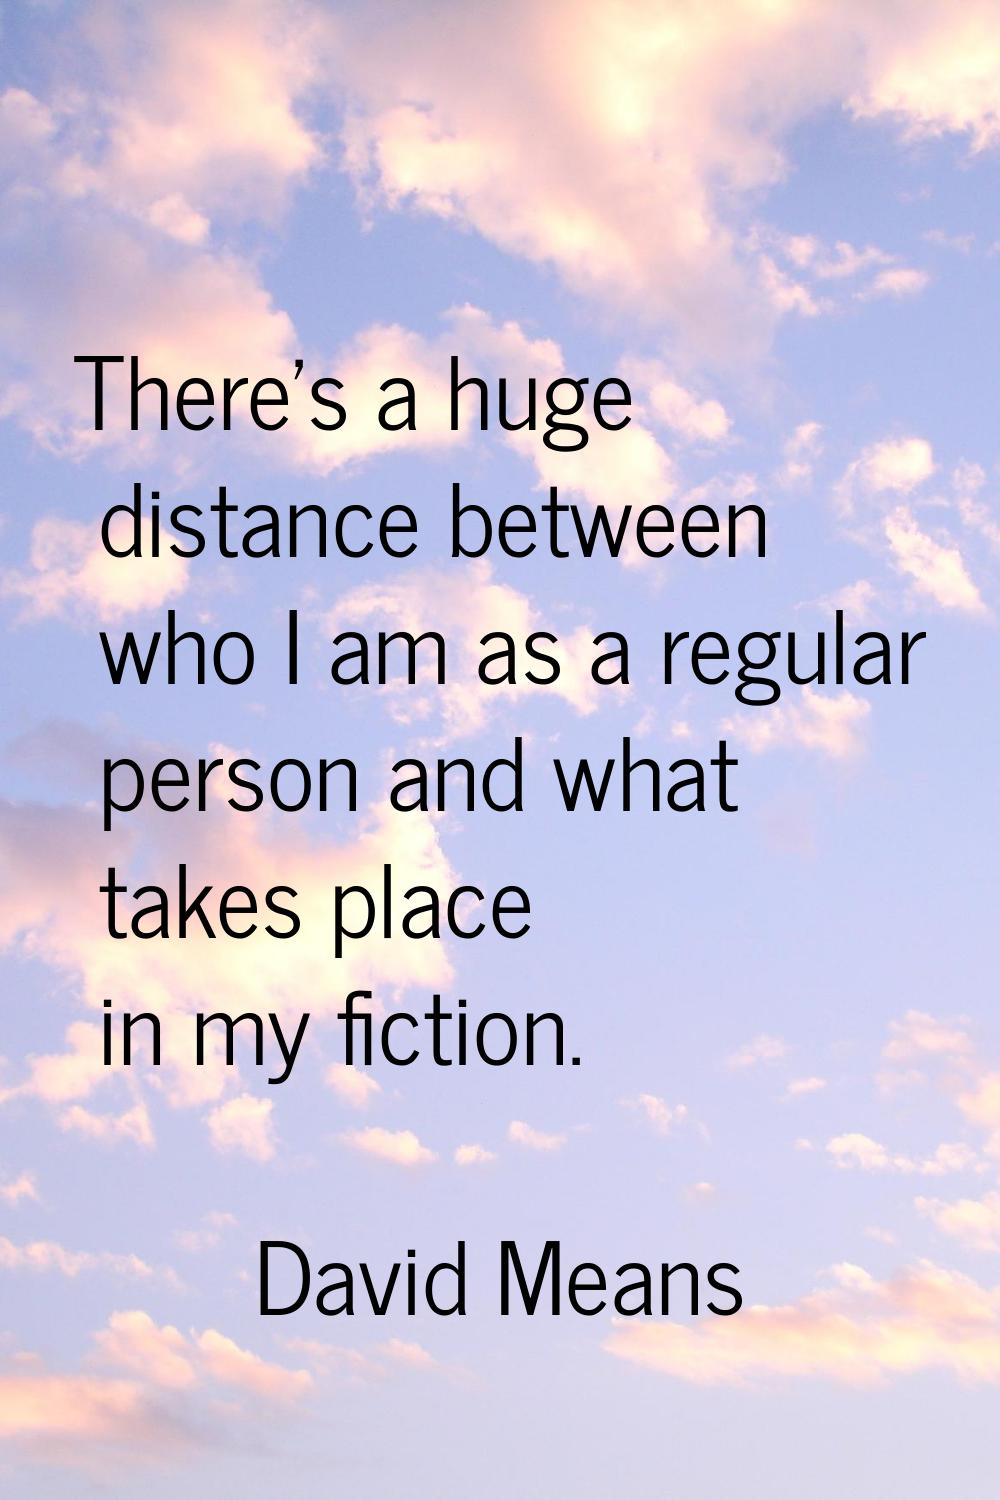 There's a huge distance between who I am as a regular person and what takes place in my fiction.